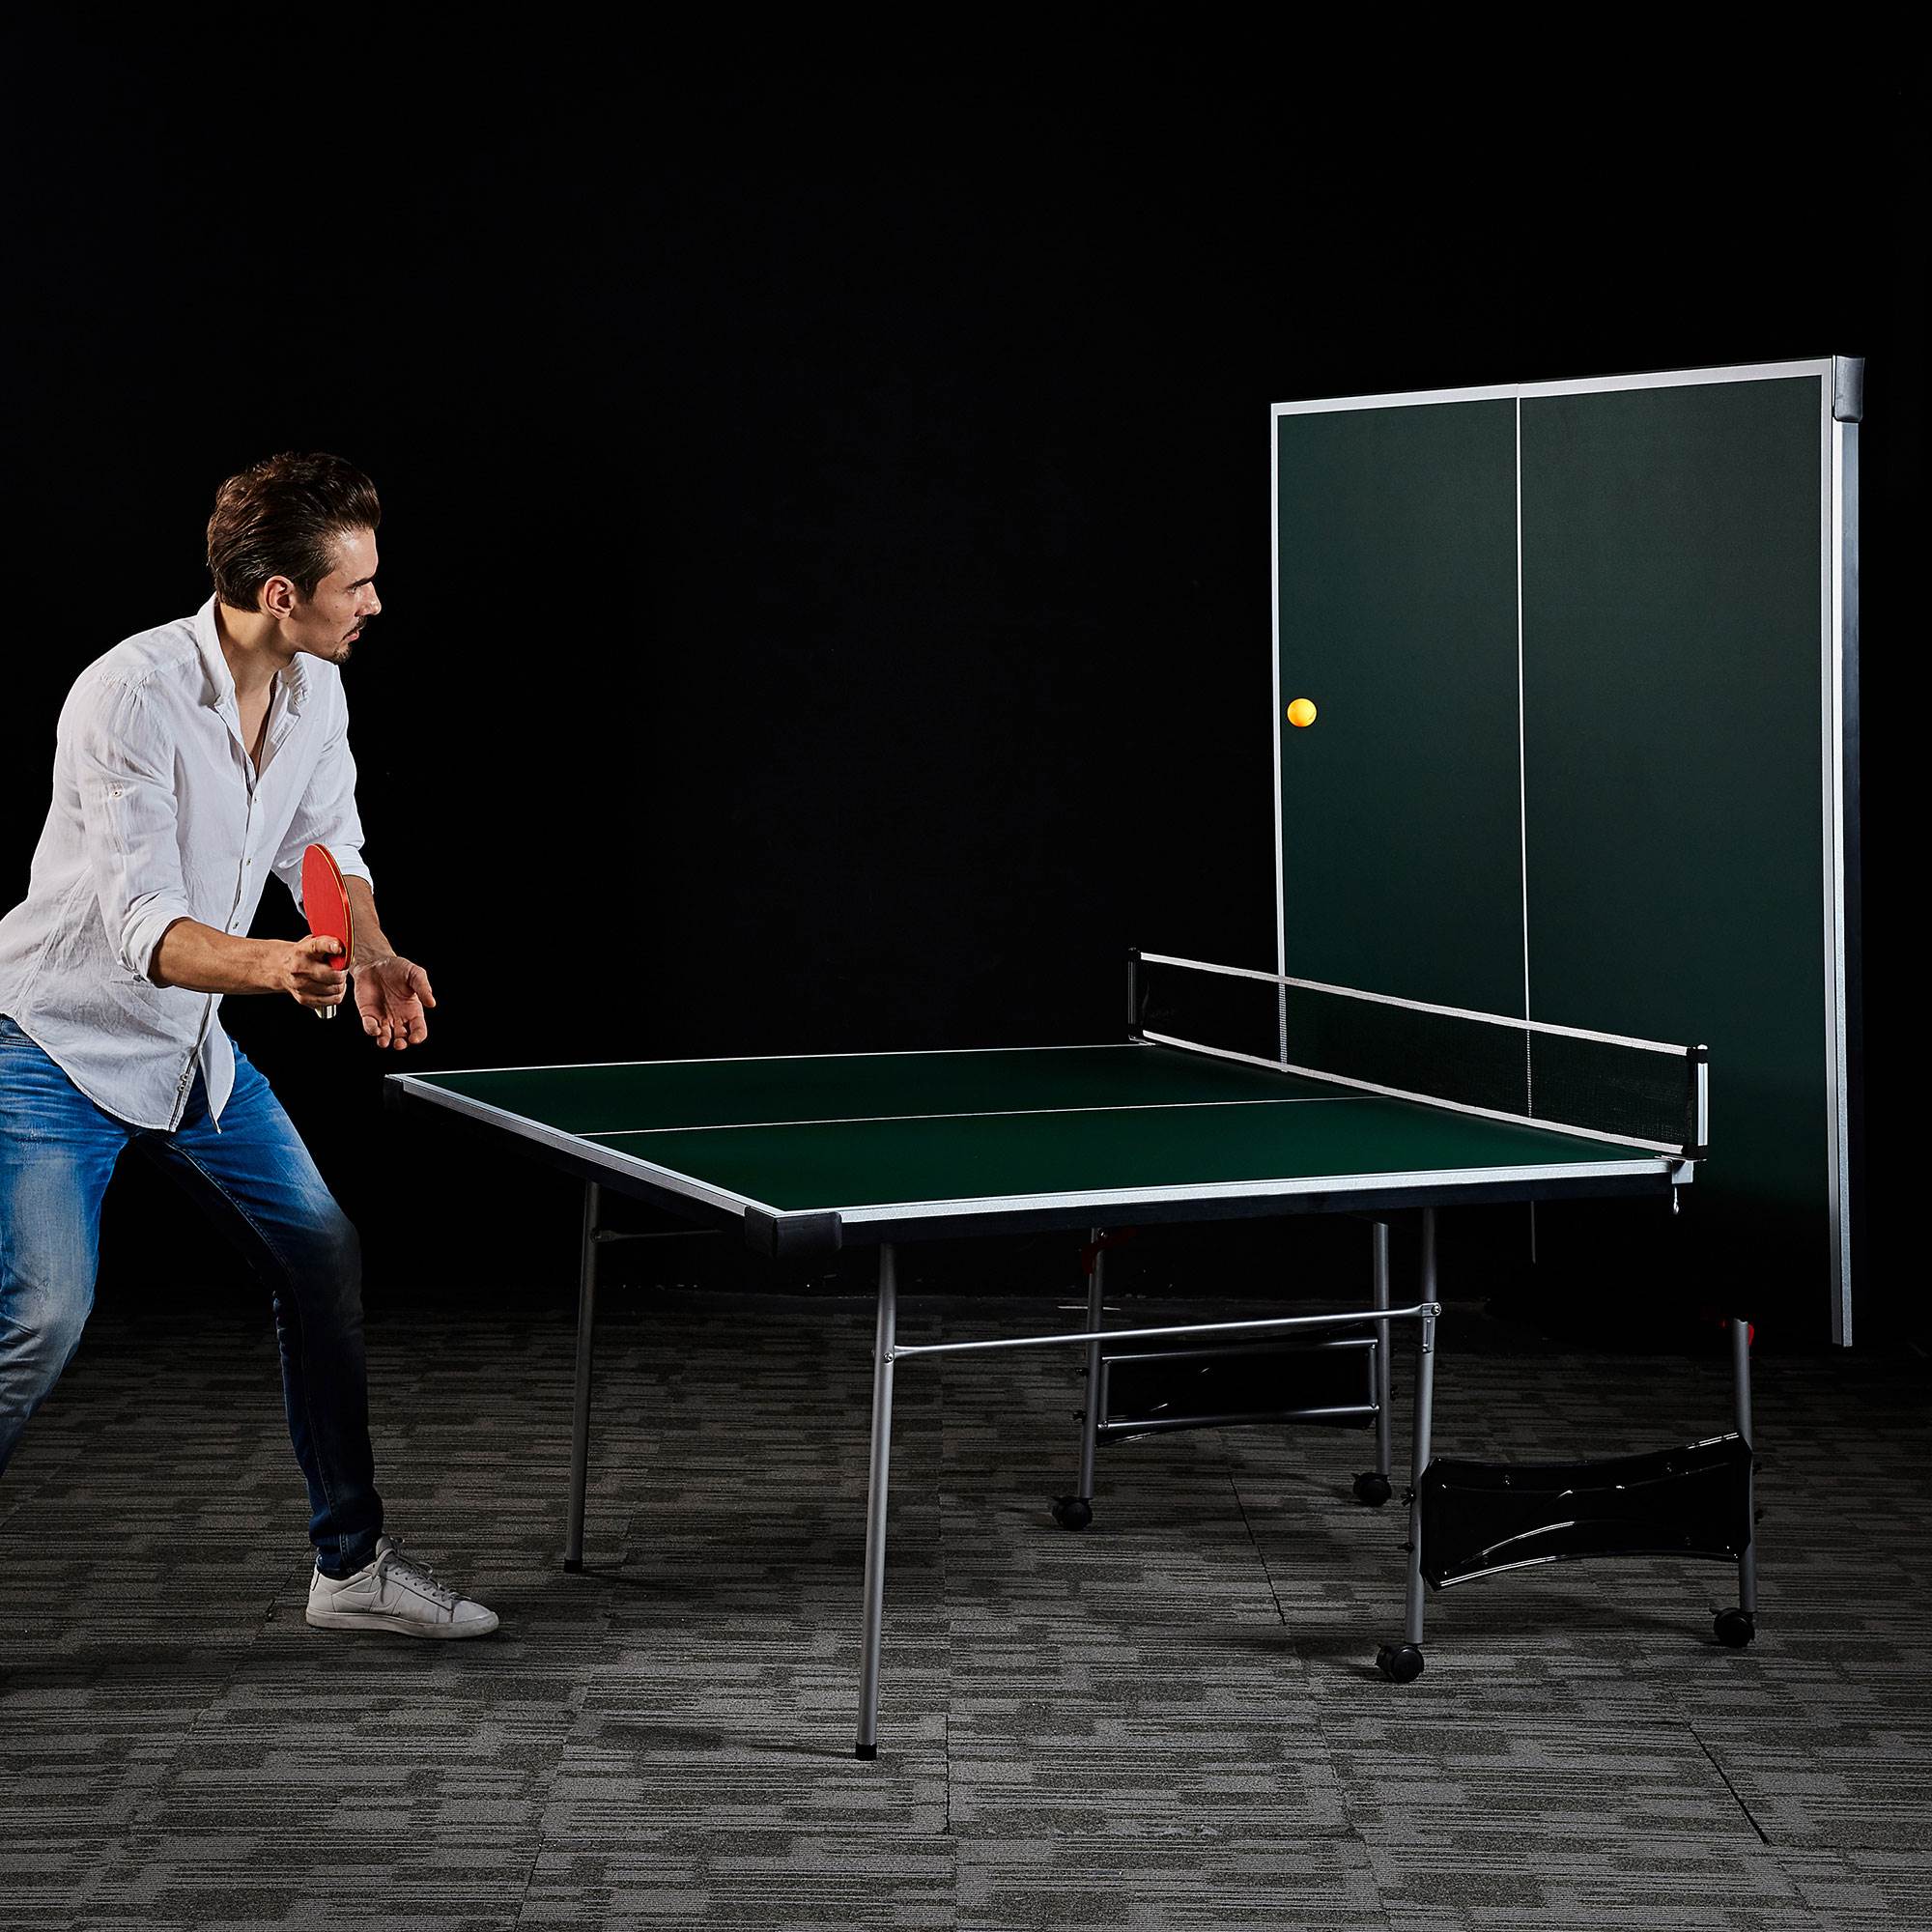 DIY Best Folding Table Tennis Table with Dual Monitor